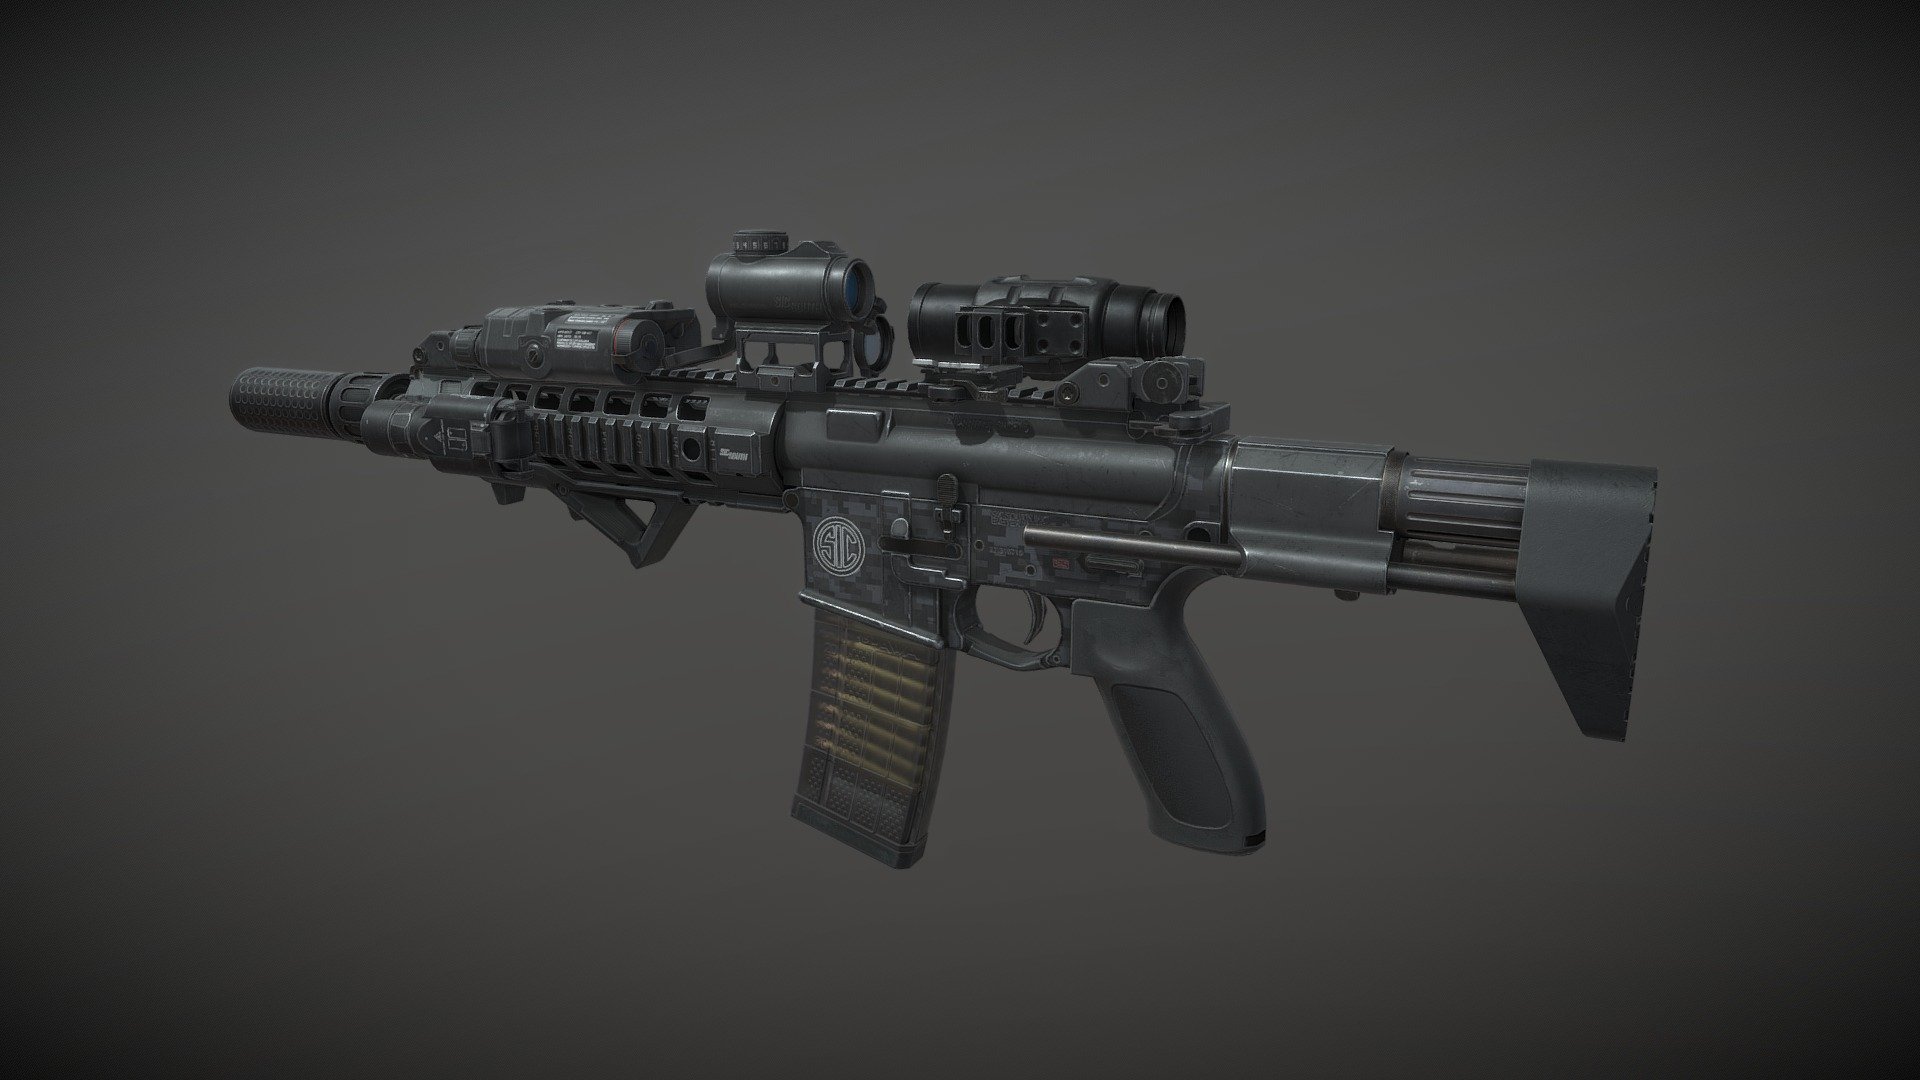 Sig516 Assault Rifle lowpoly modeling.
This modeling is optimized for PBR.

Update

2022-06-30
The texture has been modified.
Fixed a minor polygon problem 3d model